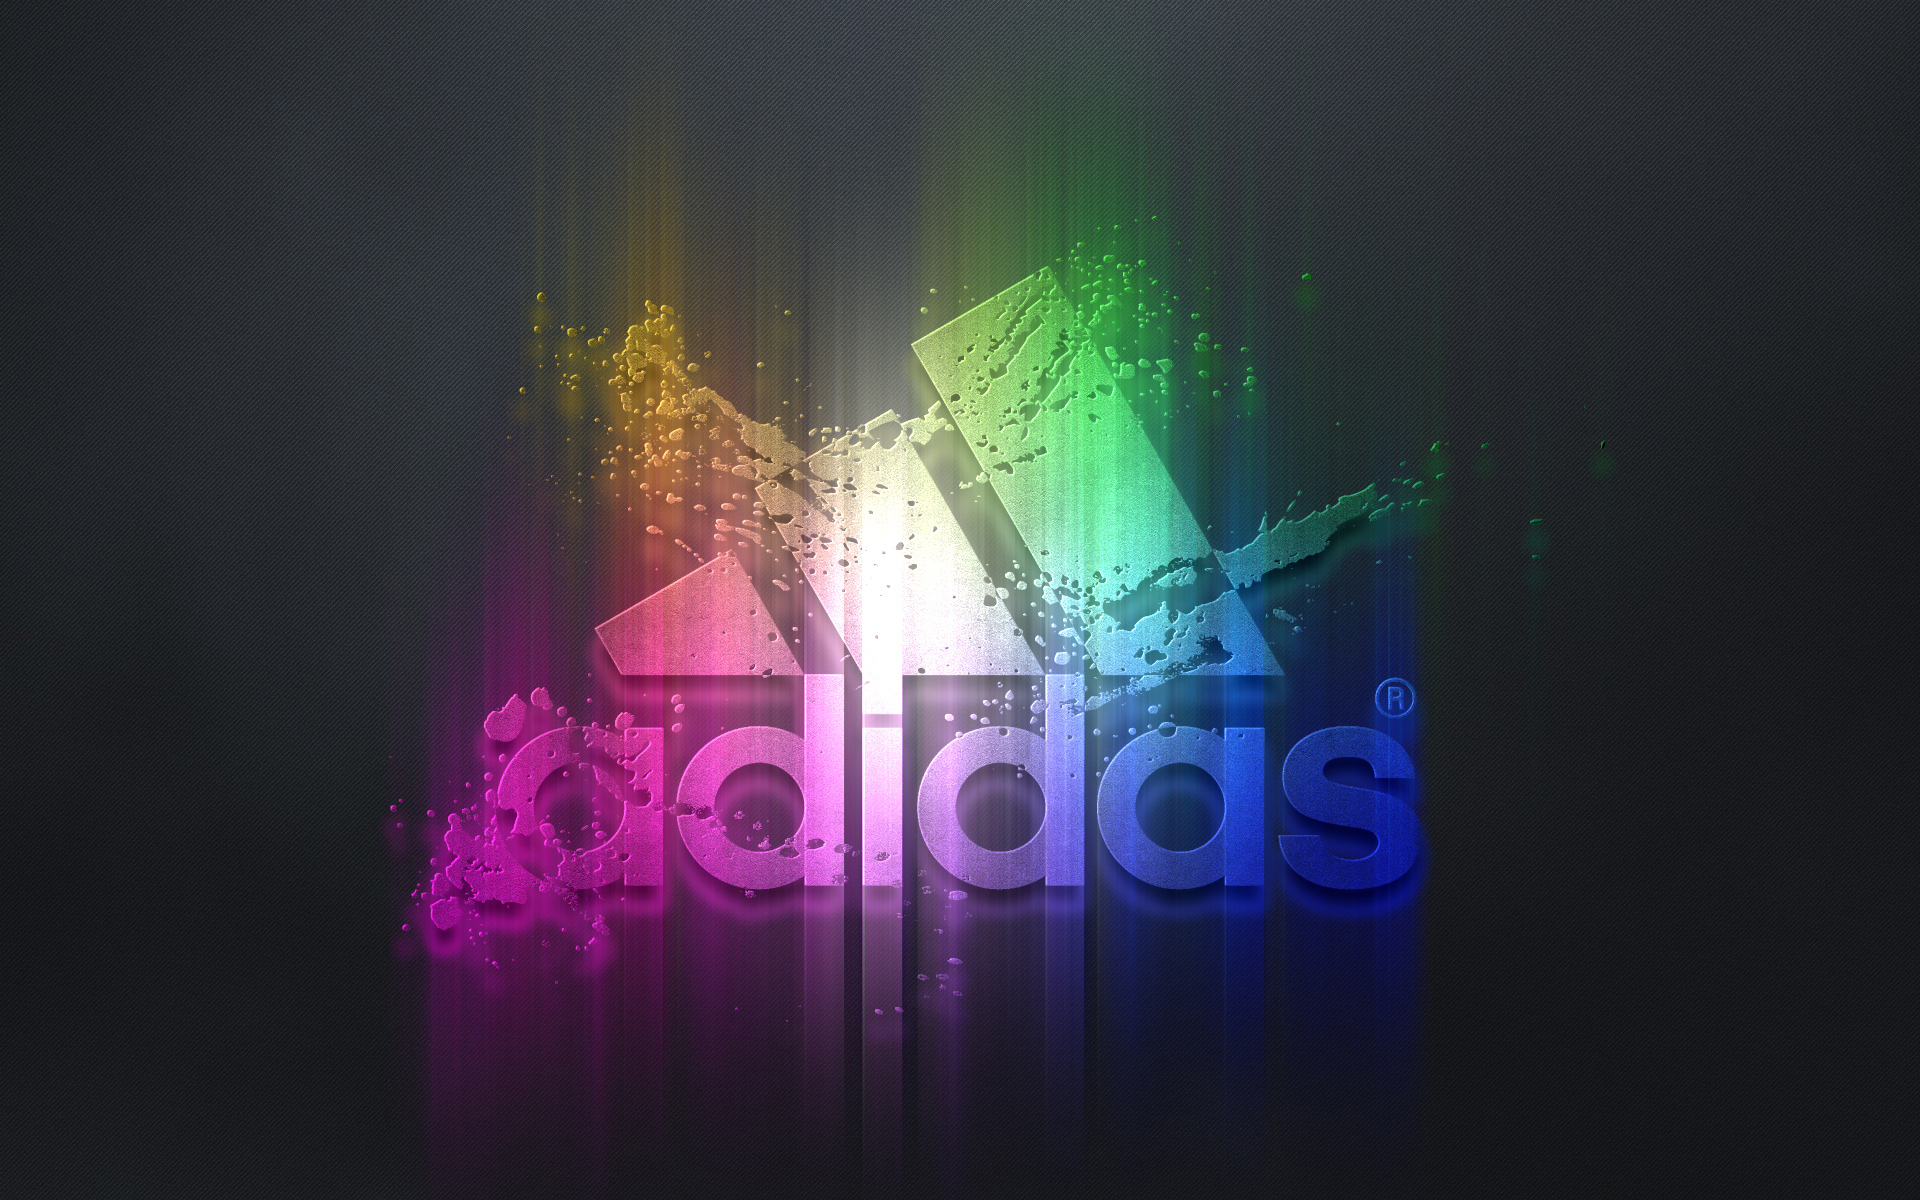 cool adidas background